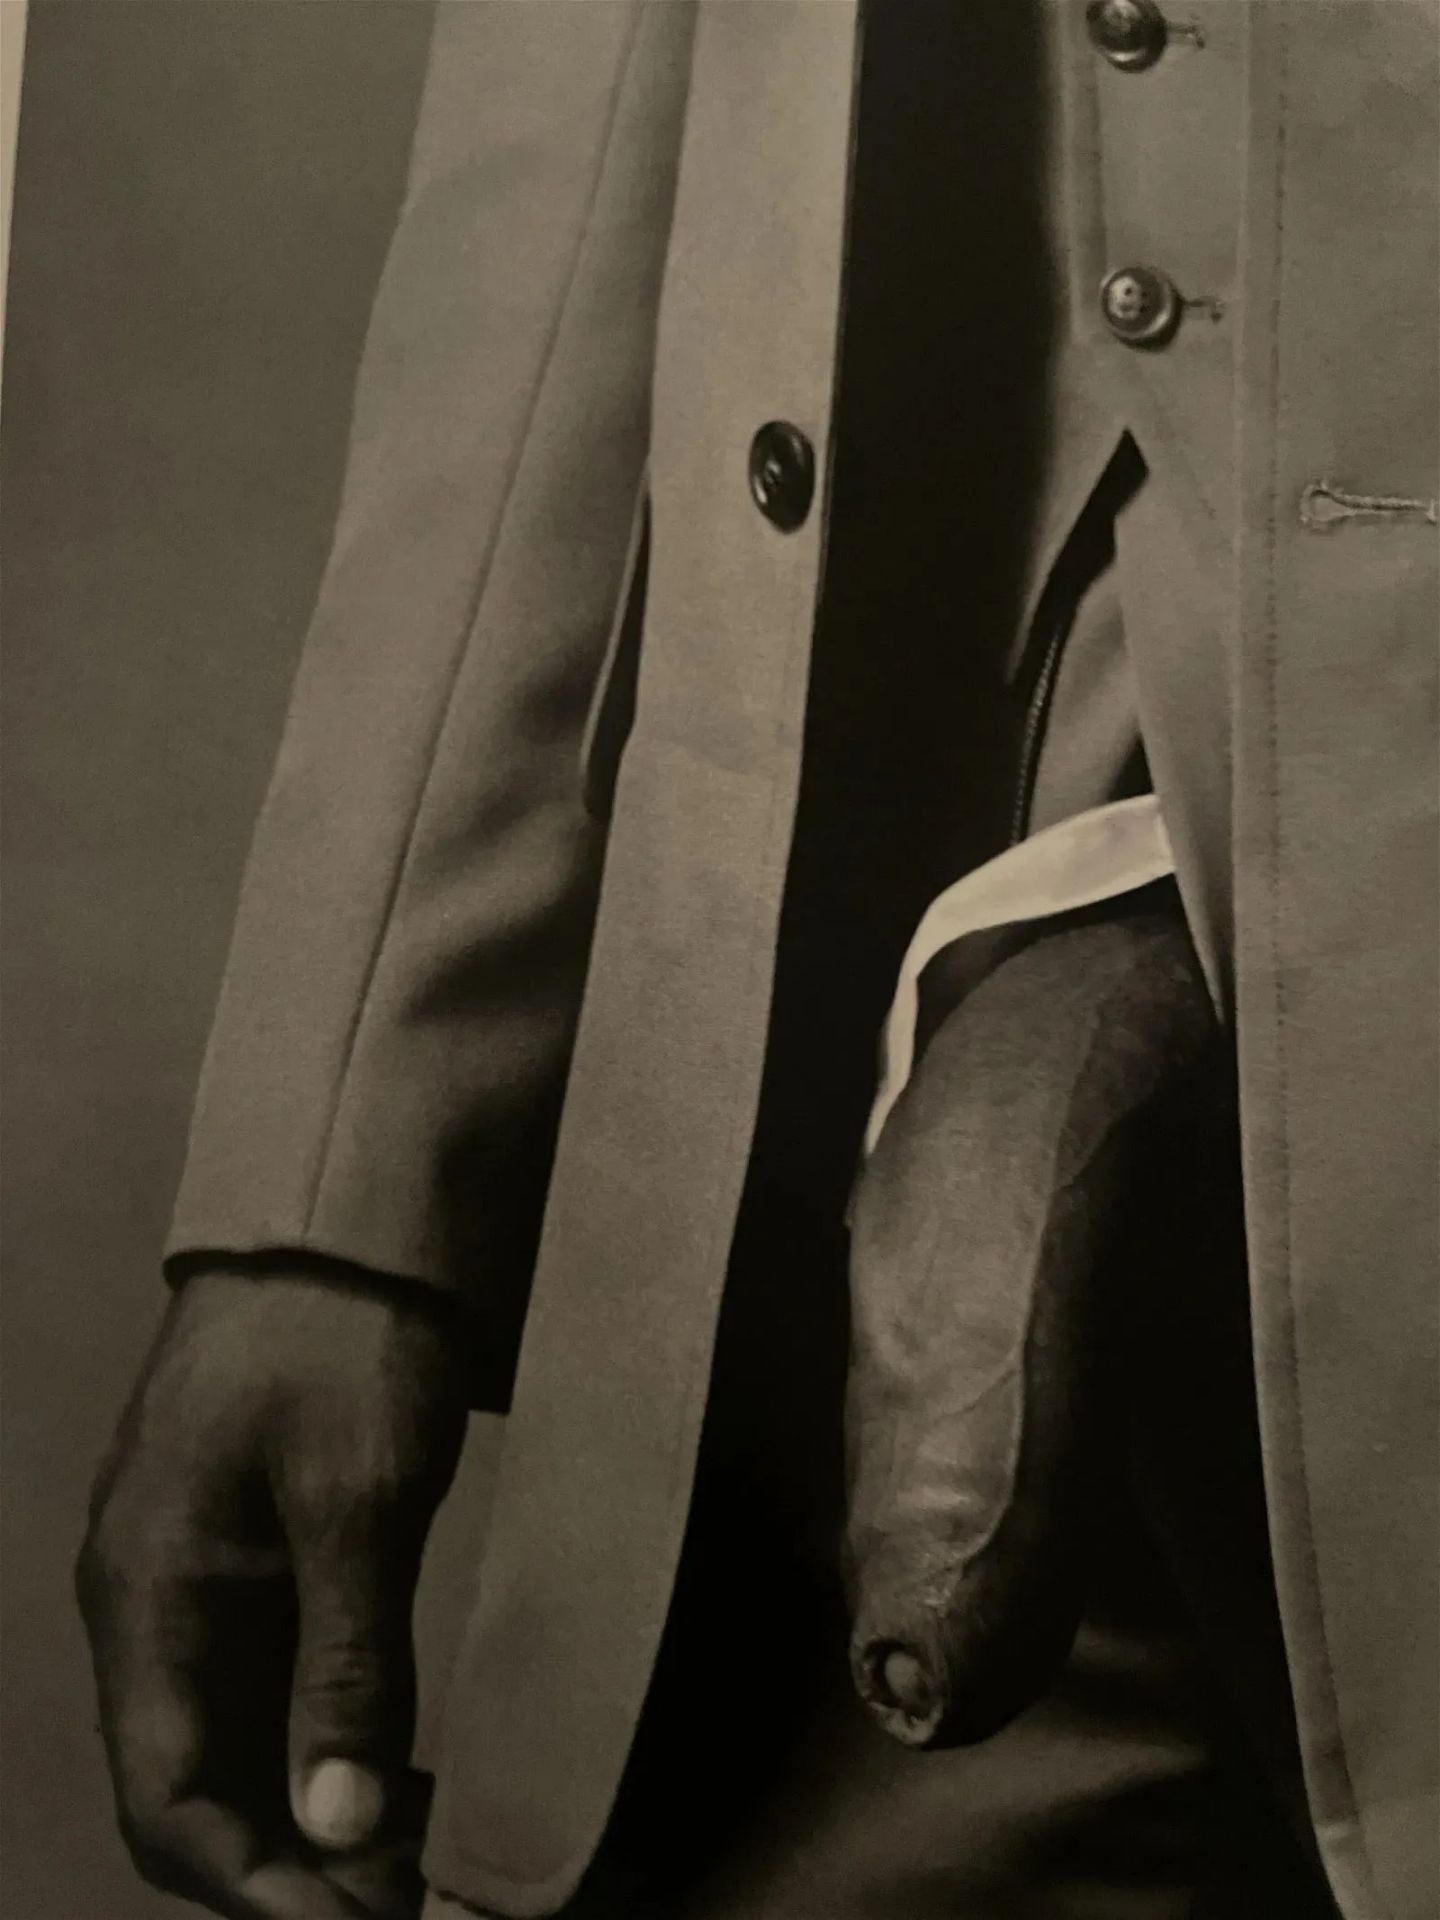 Robert Mapplethorpe "Man in Polyester Suit, 1980s" Print - Image 4 of 5